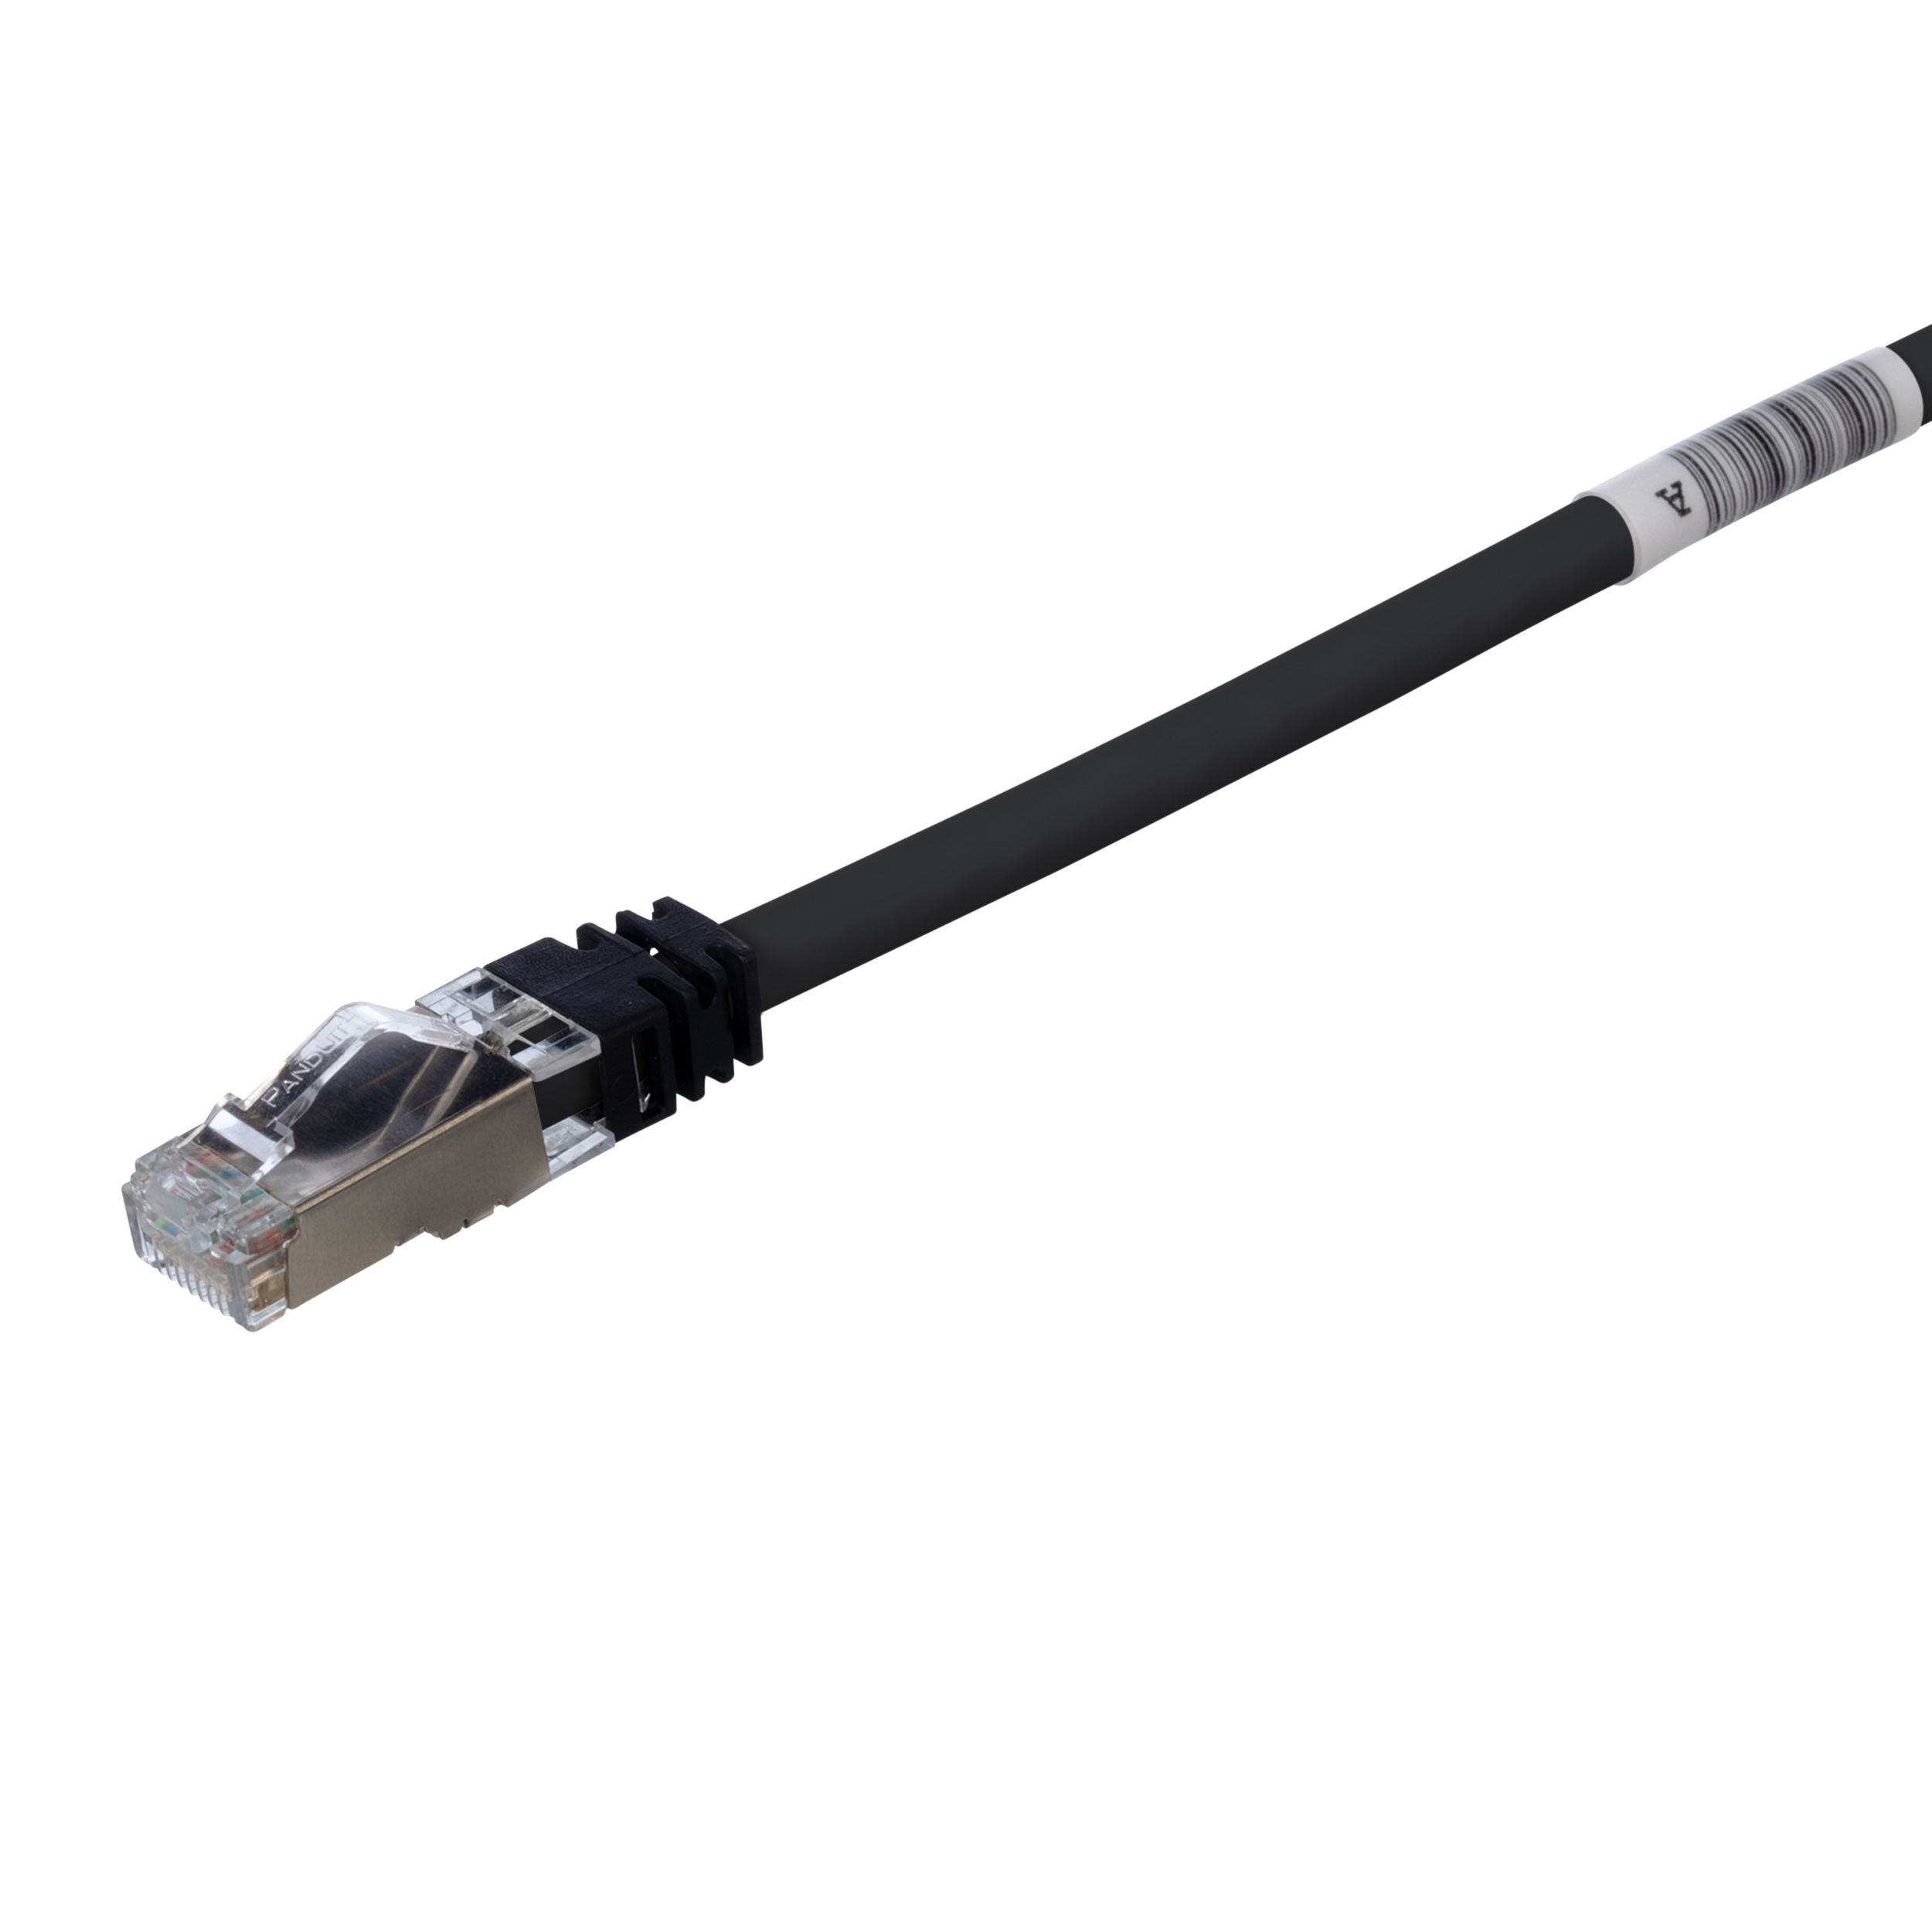 Cat 6A 26 AWG Shielded Patch Cord, 7 m, Black